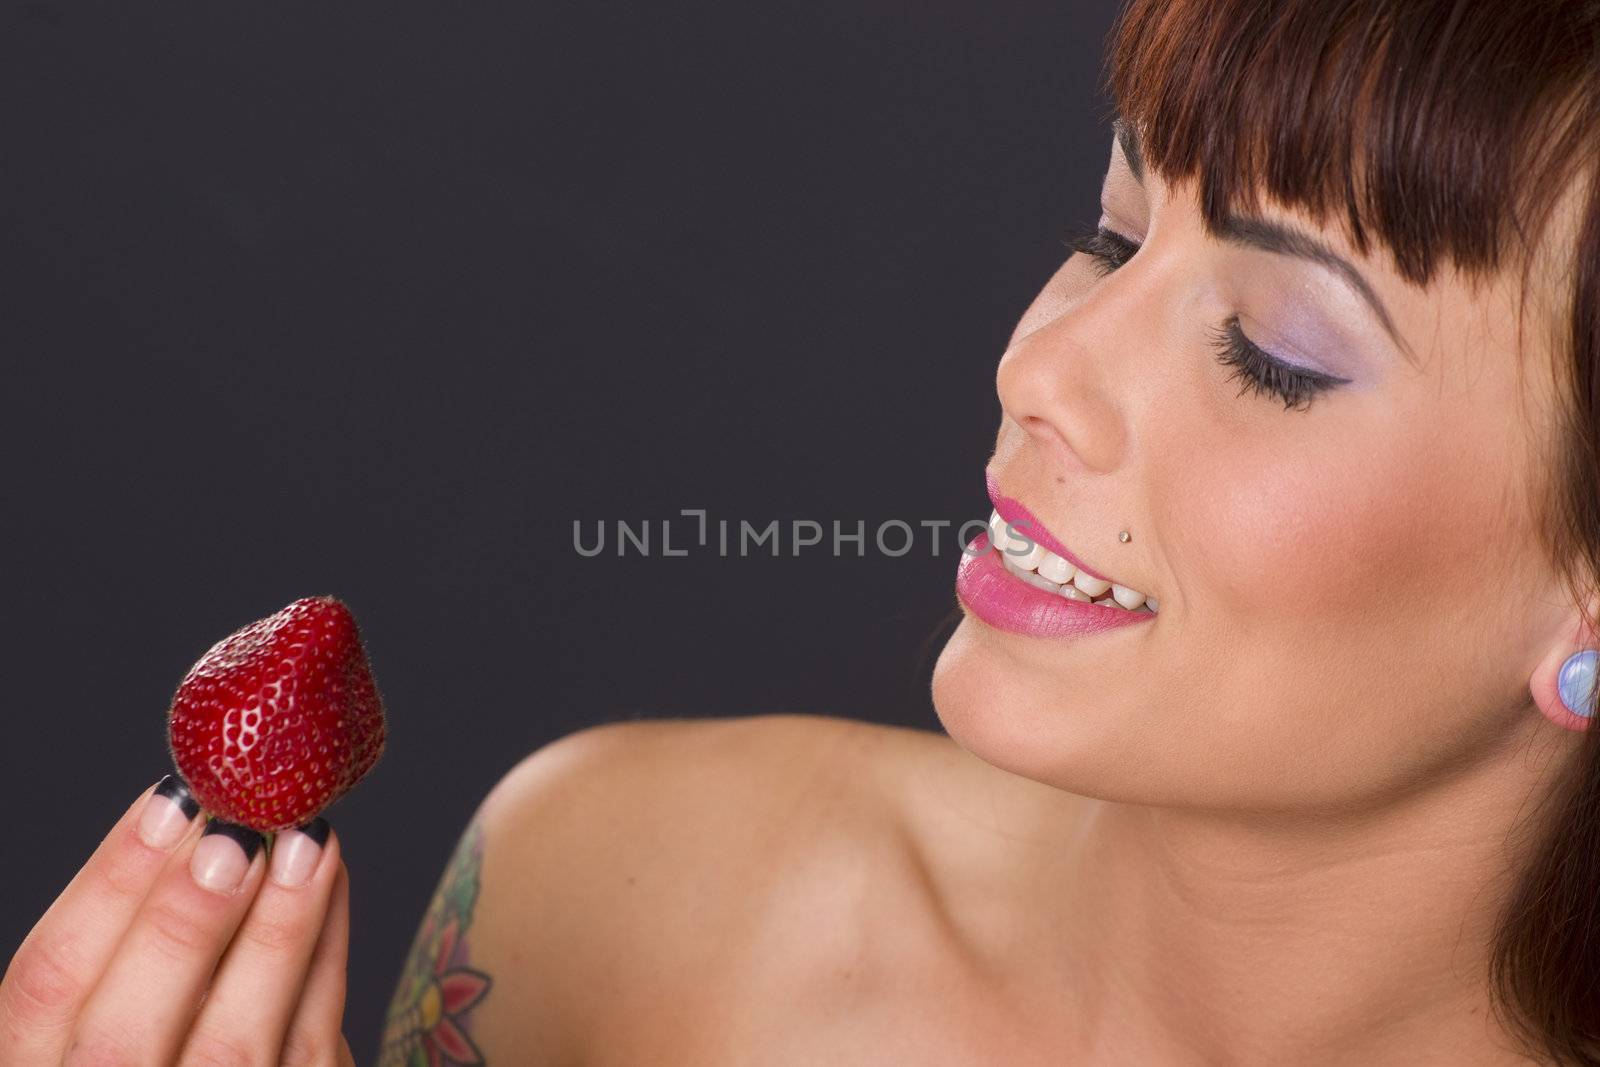 woman looks at her healthy snack of Strawberry